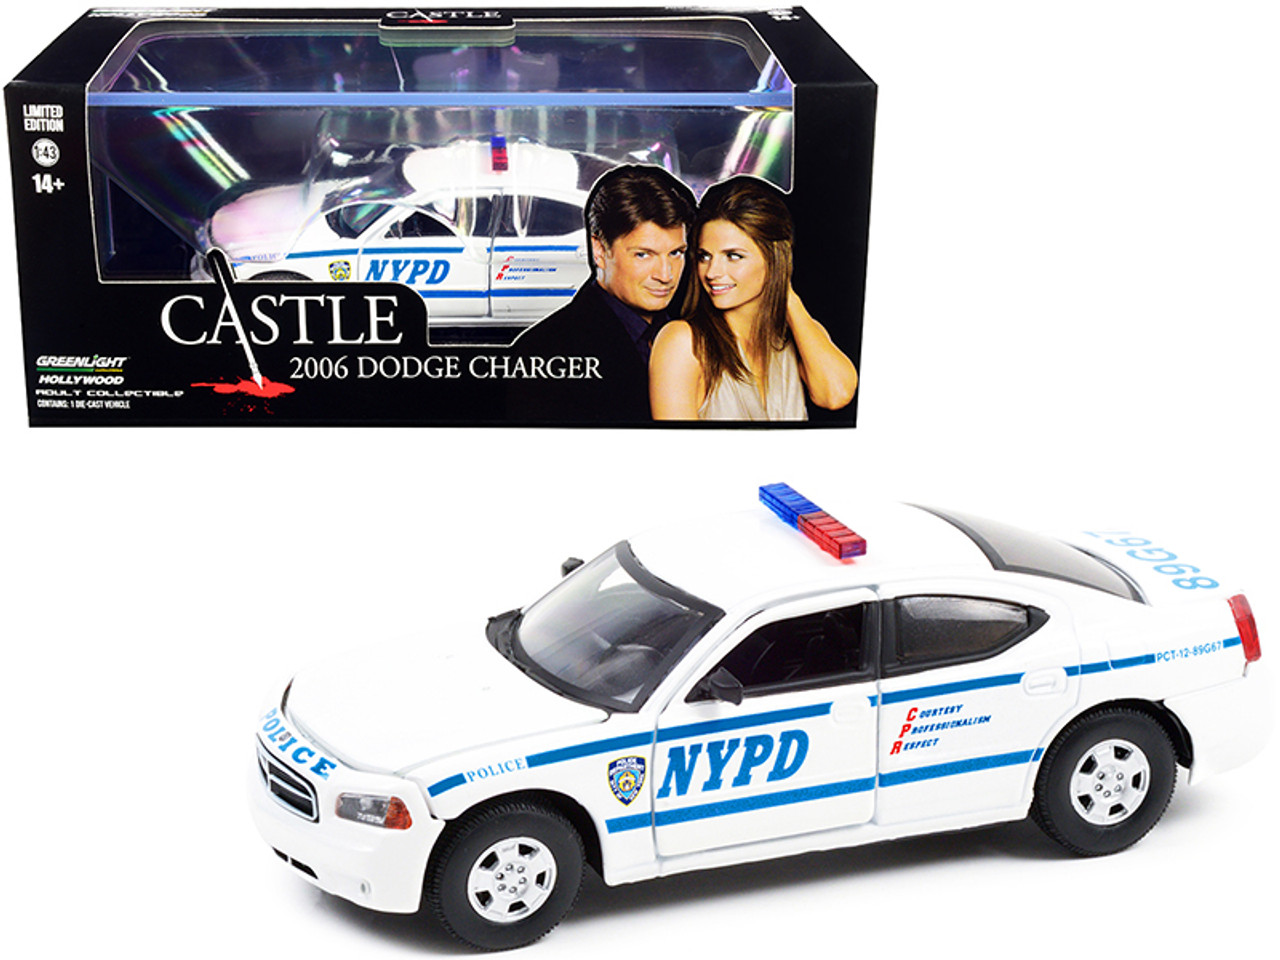 2006 Dodge Charger White "New York City Police Department" (NYPD) "Castle" (2009-2016) TV Series 1/43 Diecast Model Car by Greenlight